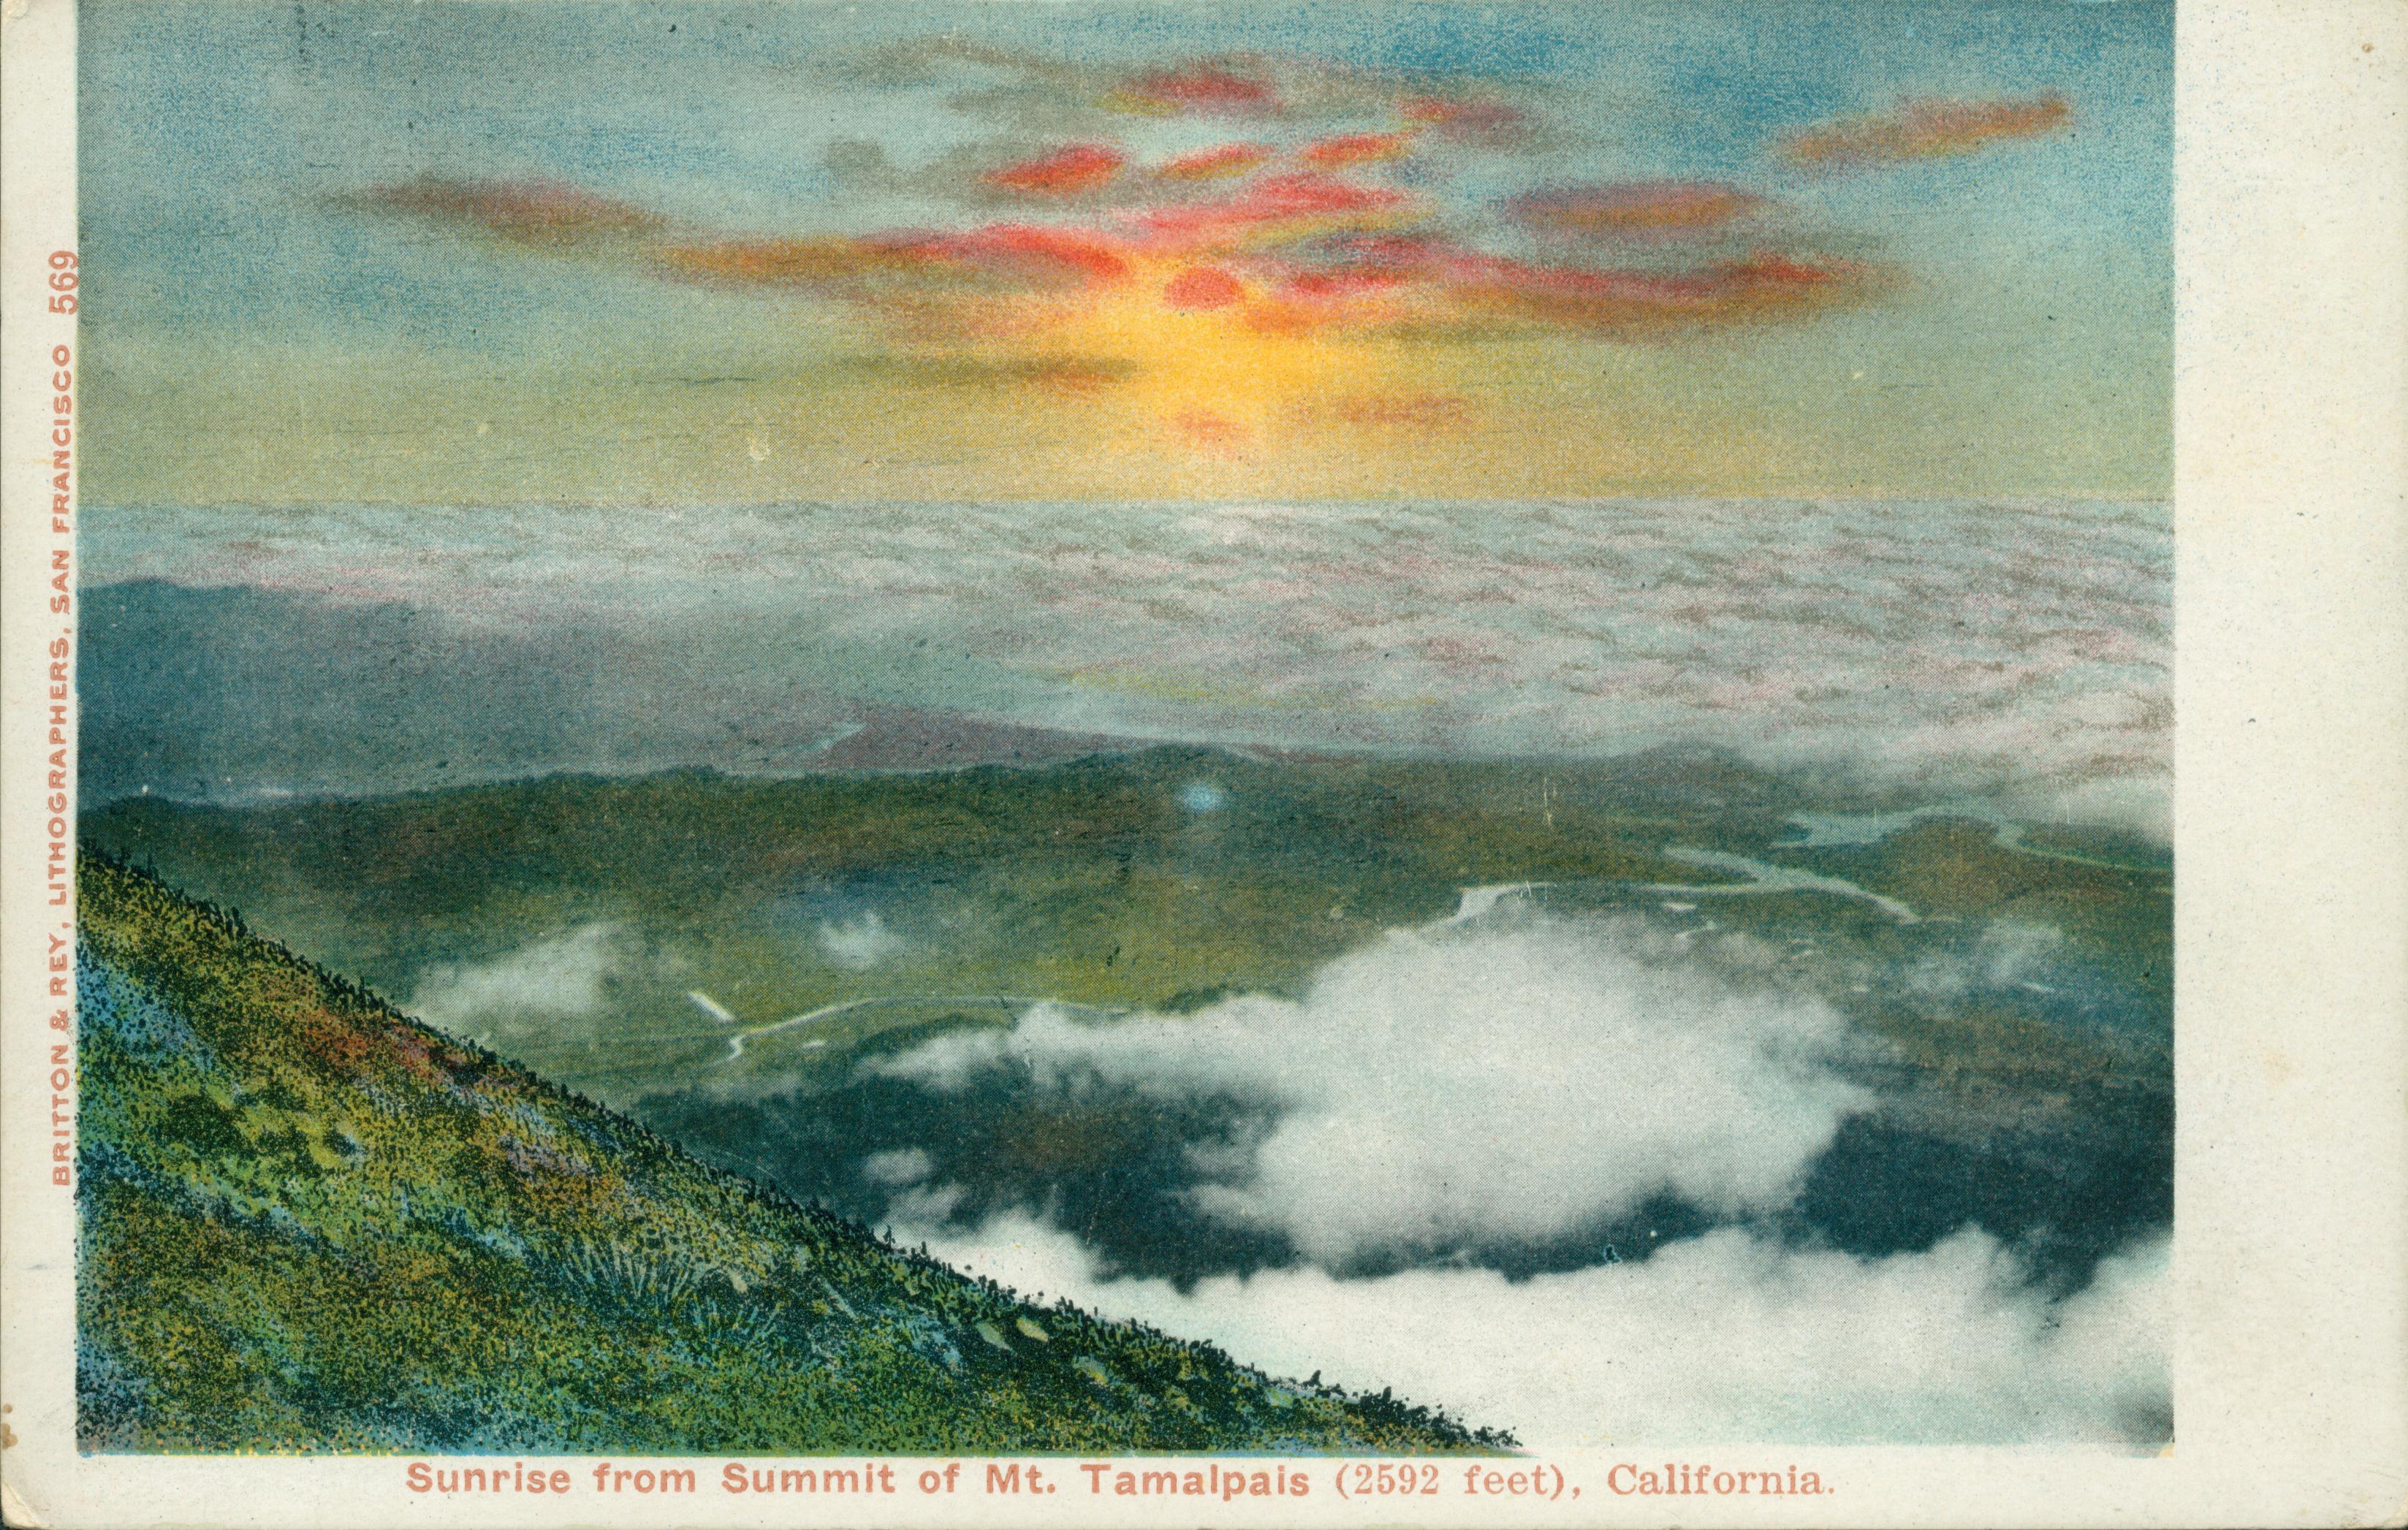 Sunrise view of valley from atop Mt. Tamalpais, California; sunrise, low clouds, rolling green hills below